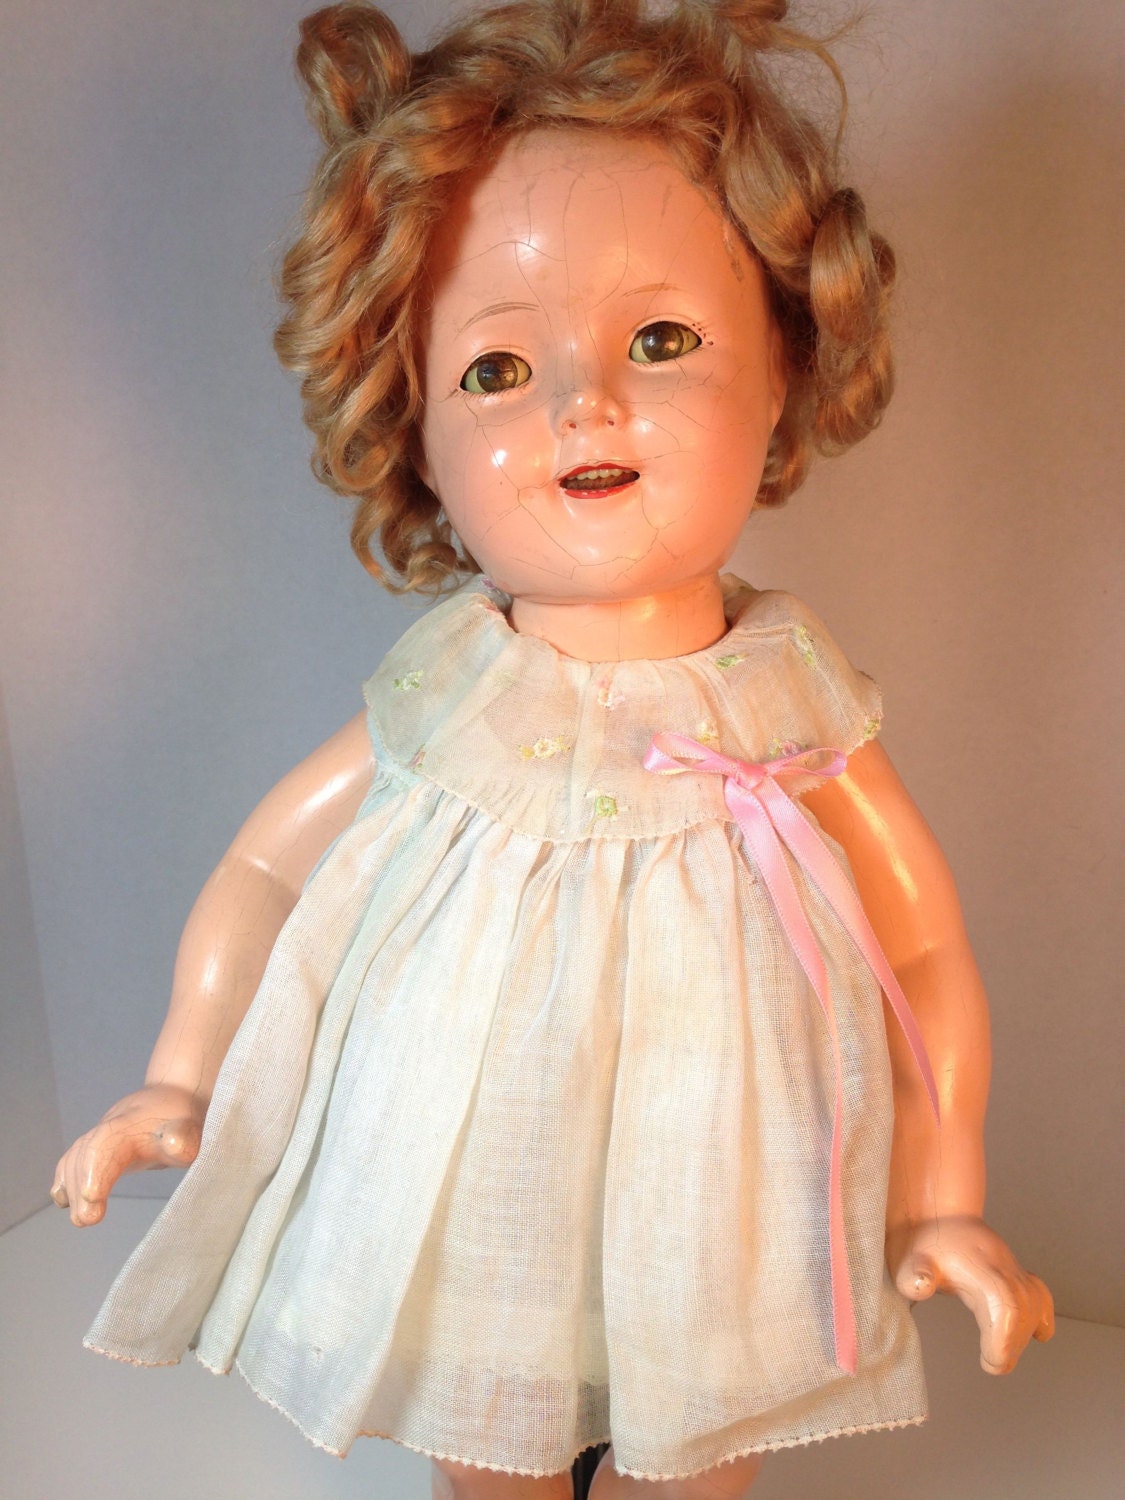 Antique Doll Values - Bing images